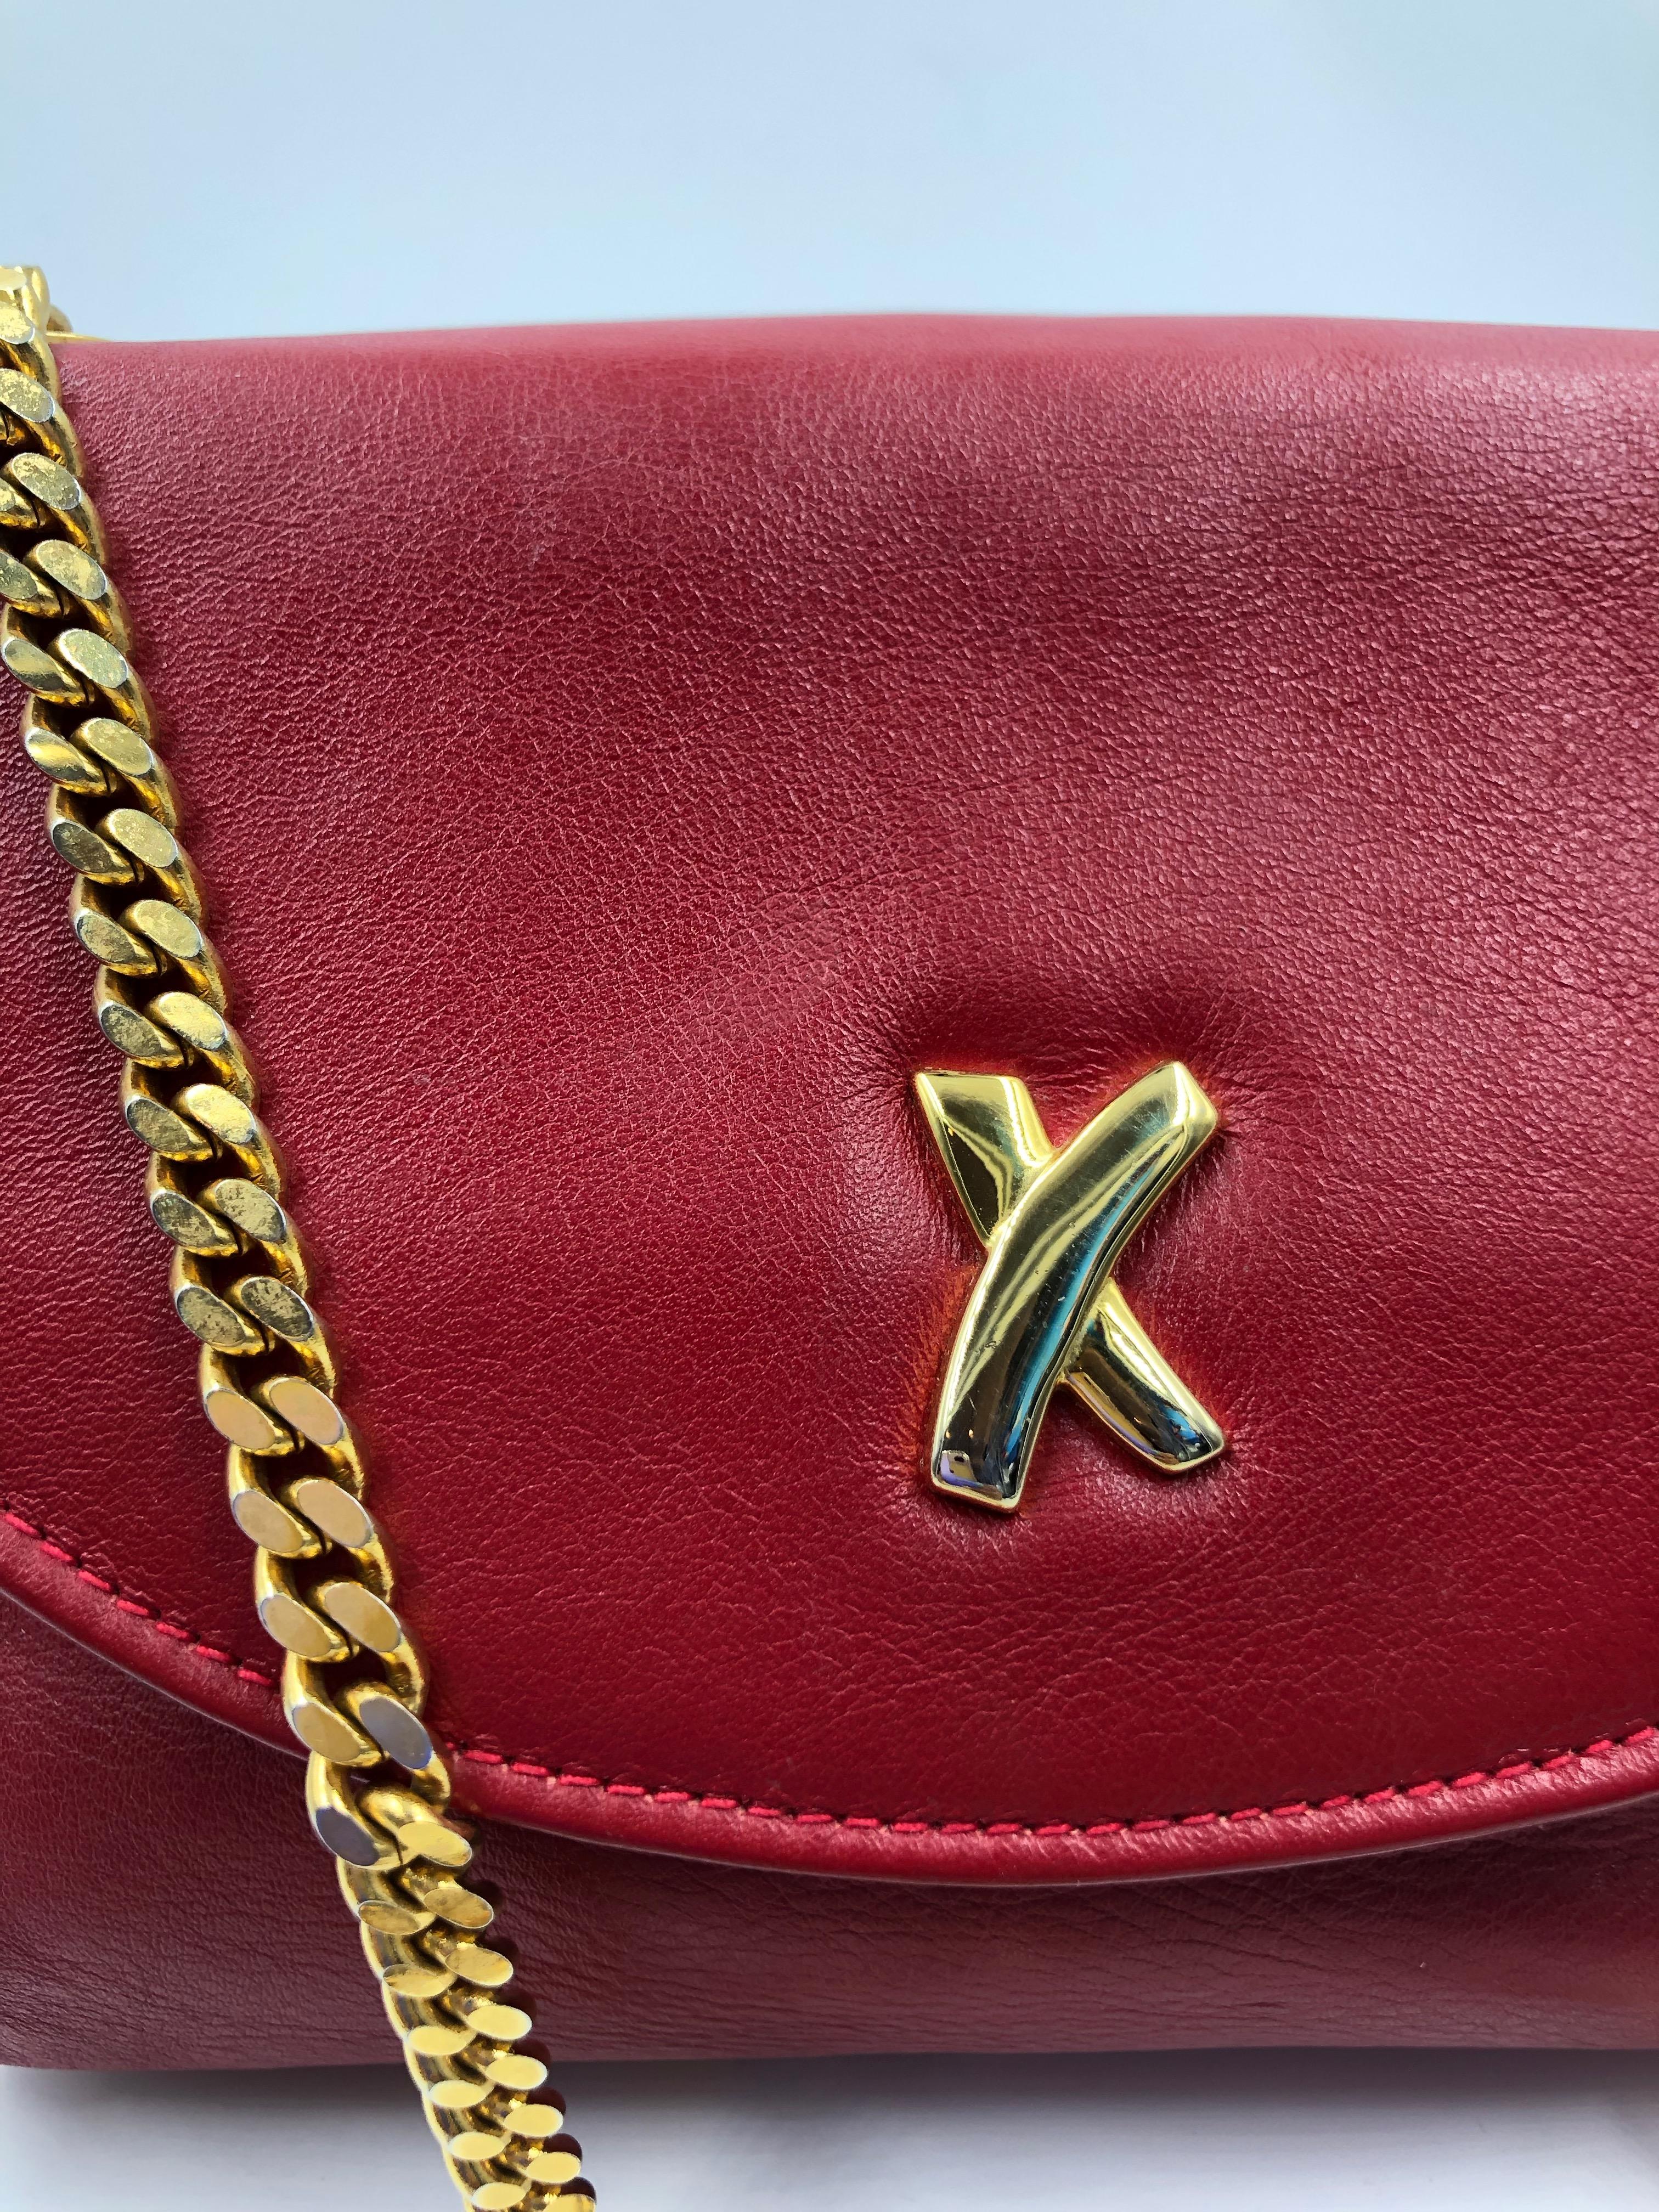 Paloma Picasso Red Leather Gold Chain Crossbody Disco Bag. Gold Signature X on front of bag. Gold hardware. Paloma Picasso signature embossed on back of bag.
Measurements taken flat:
Length - 7